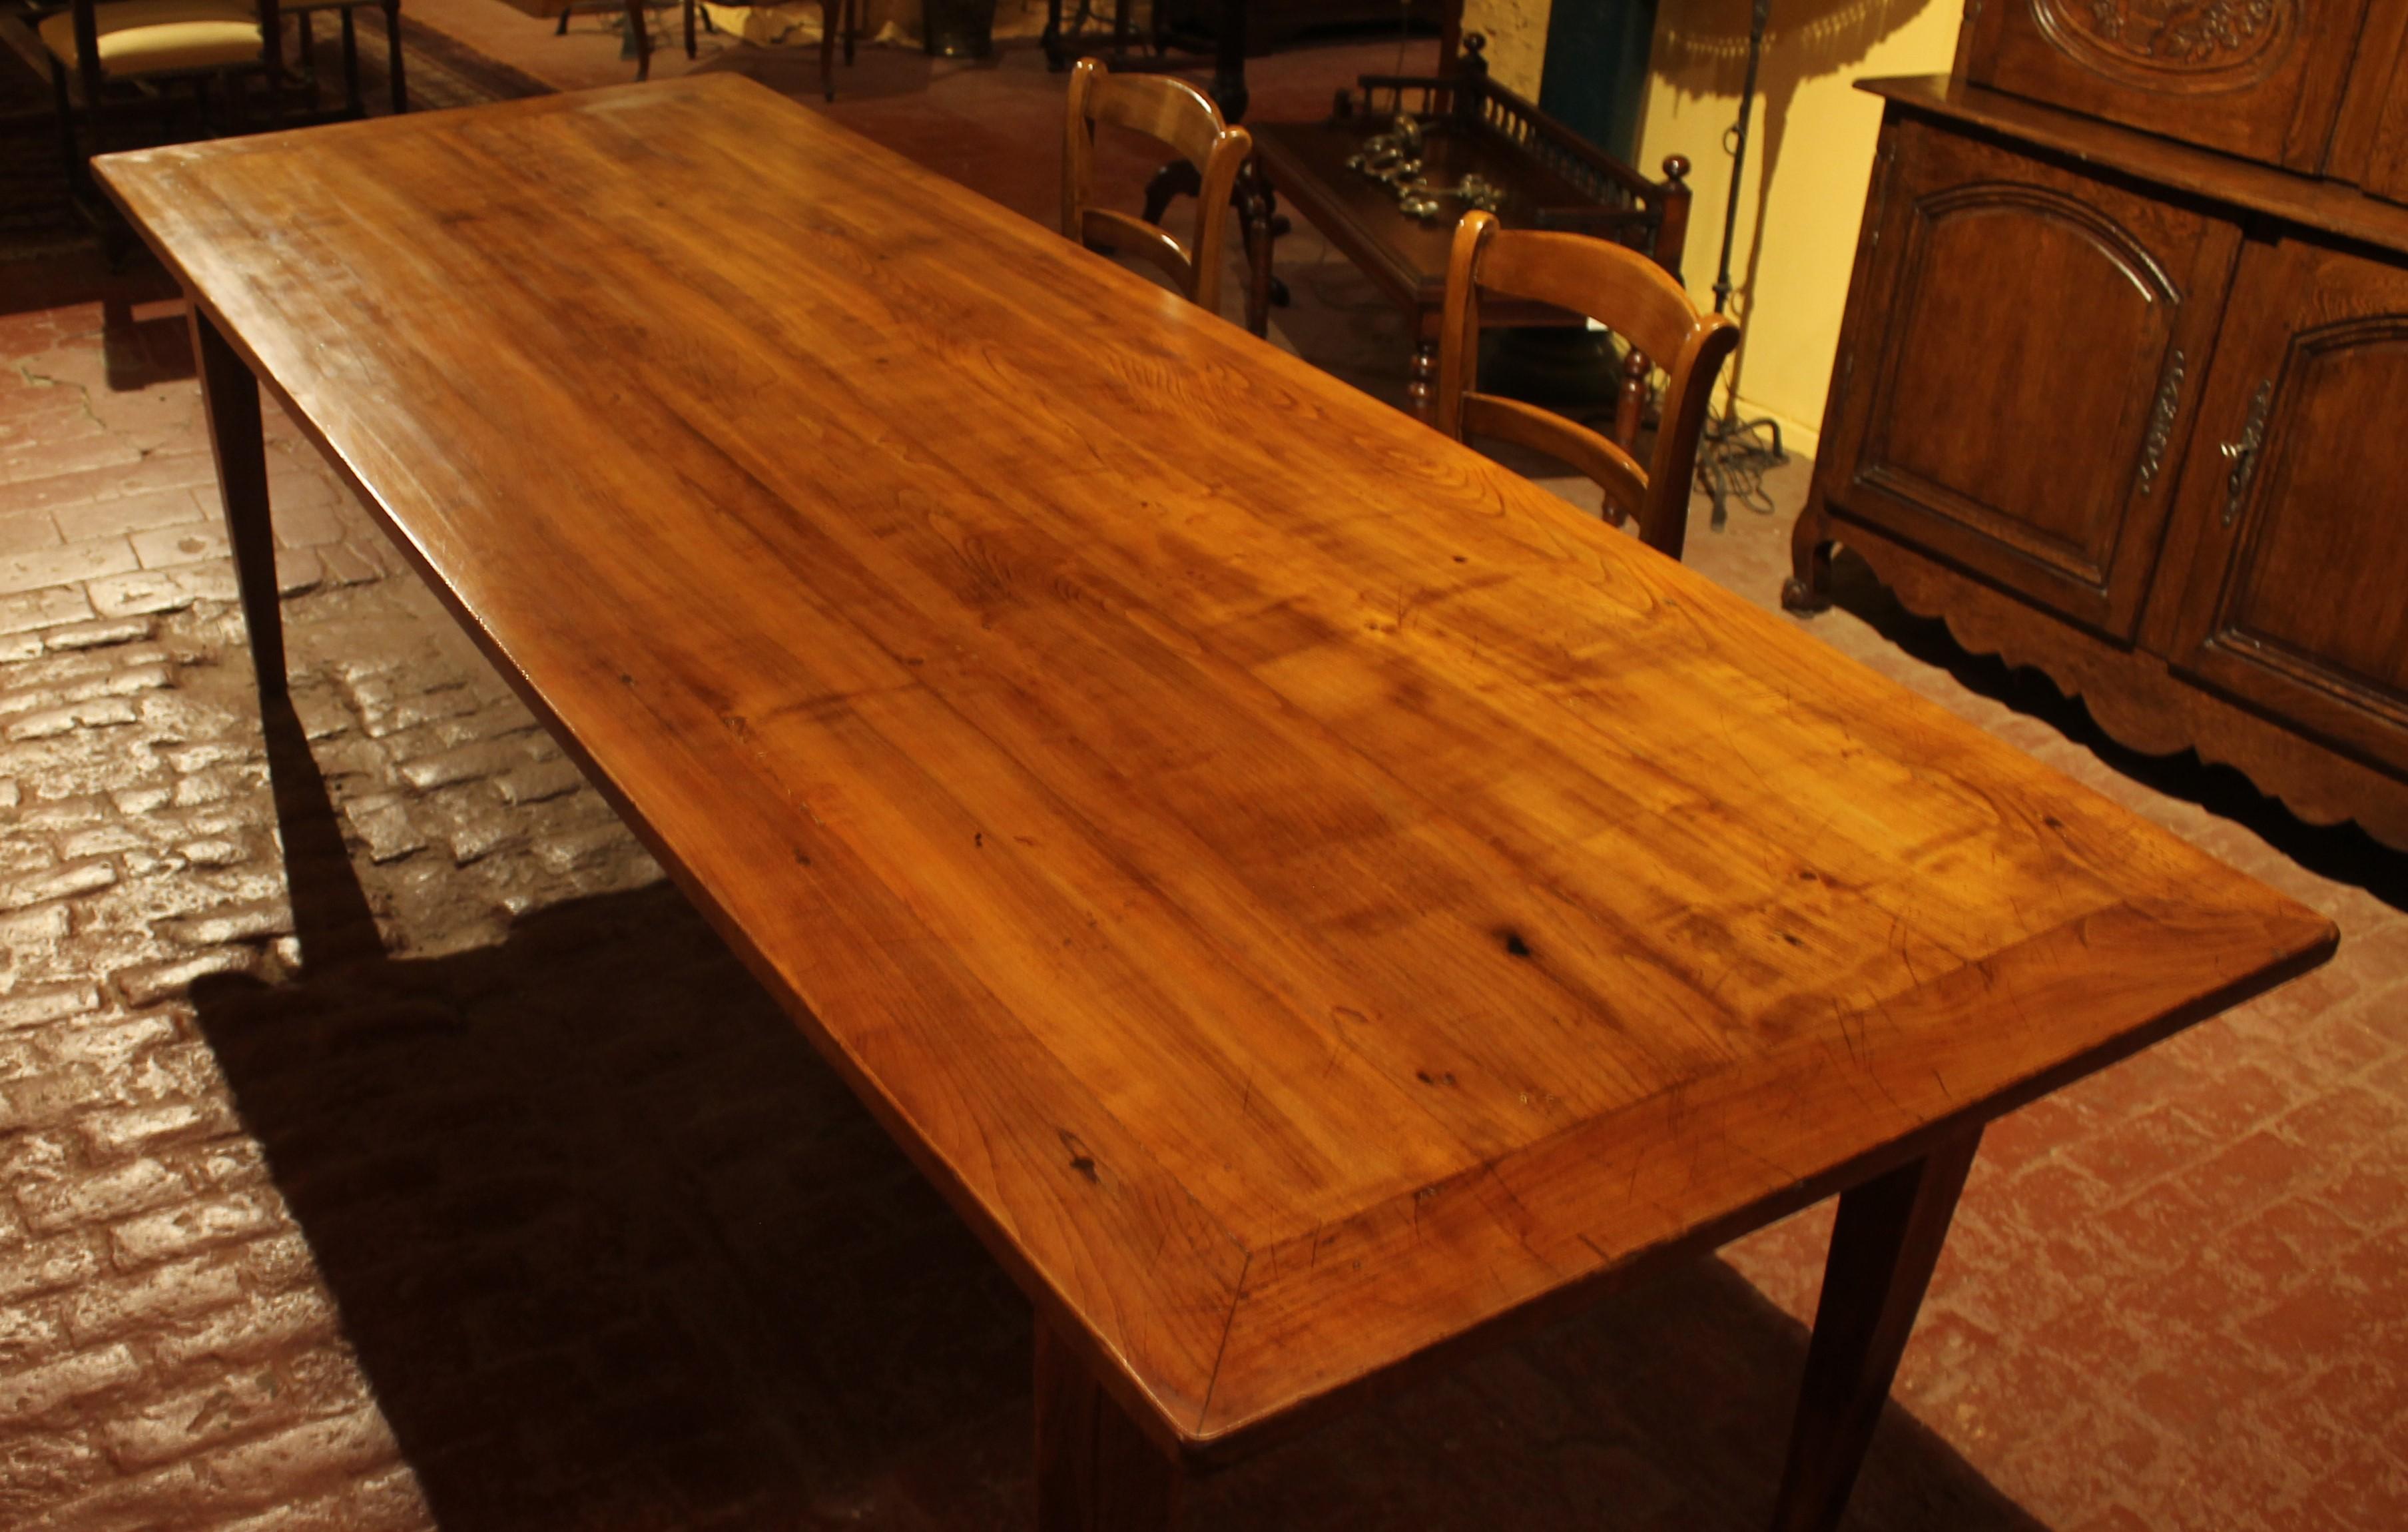 Large 19th Century Cherry Wood Refectory Table With A Width Of 100cm For Sale 10